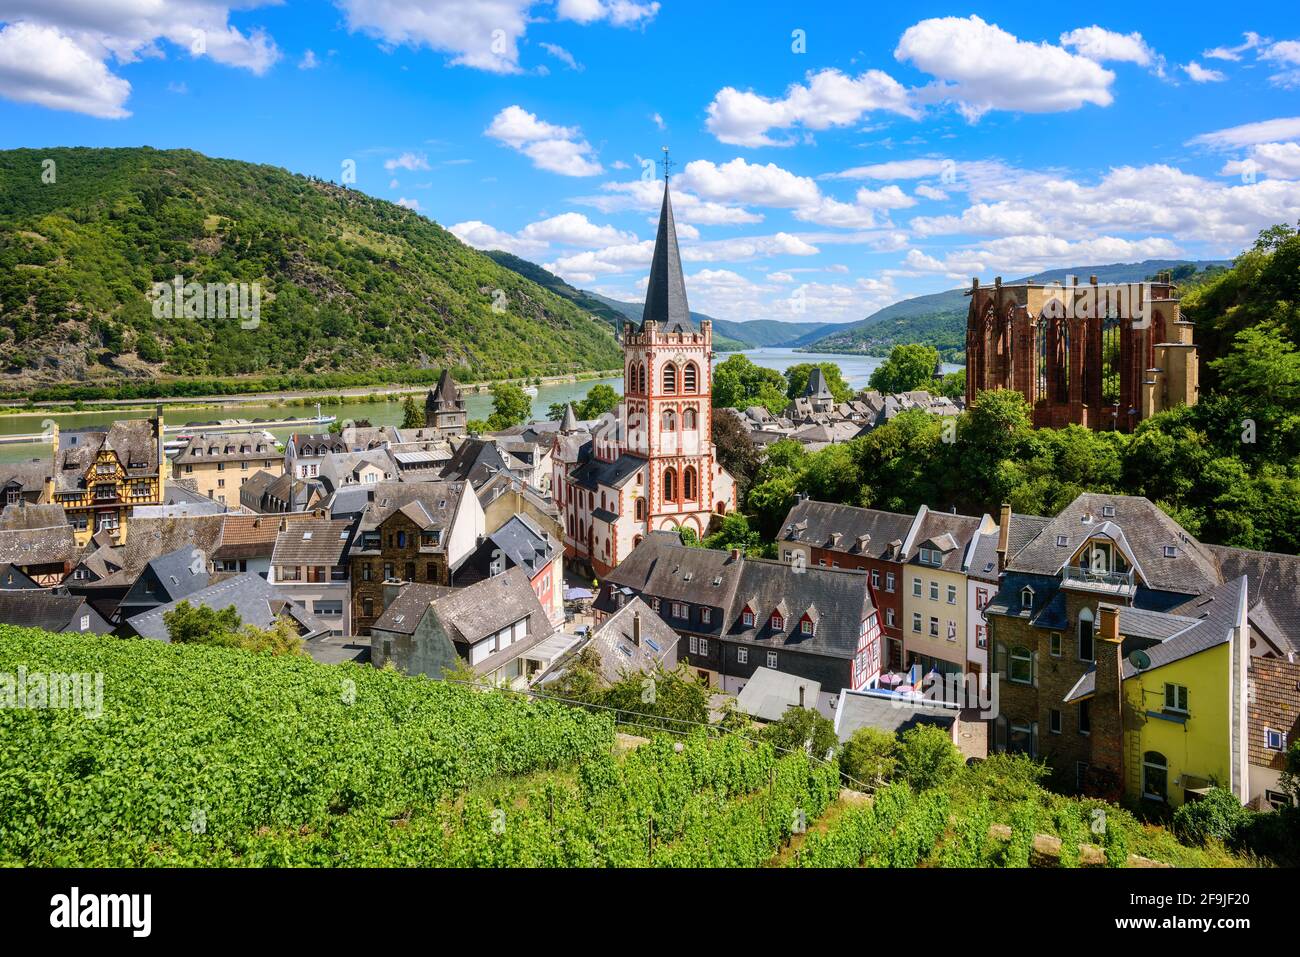 Bacharach am Rhein town, Germany, famous for its vineyard hills and romantic location in a Rhine river valley Stock Photo